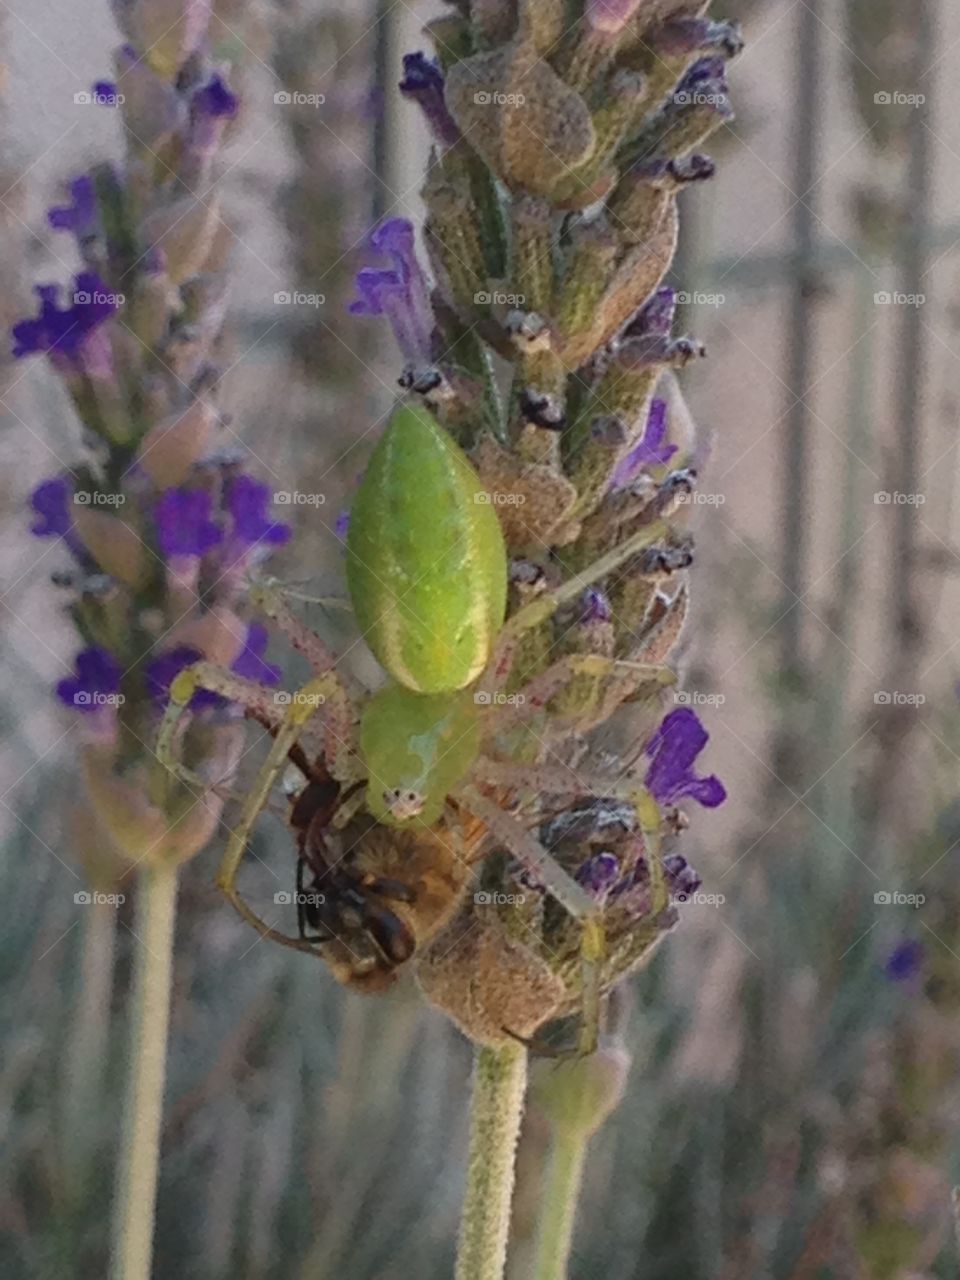 Green leaf spider eating a honey bee